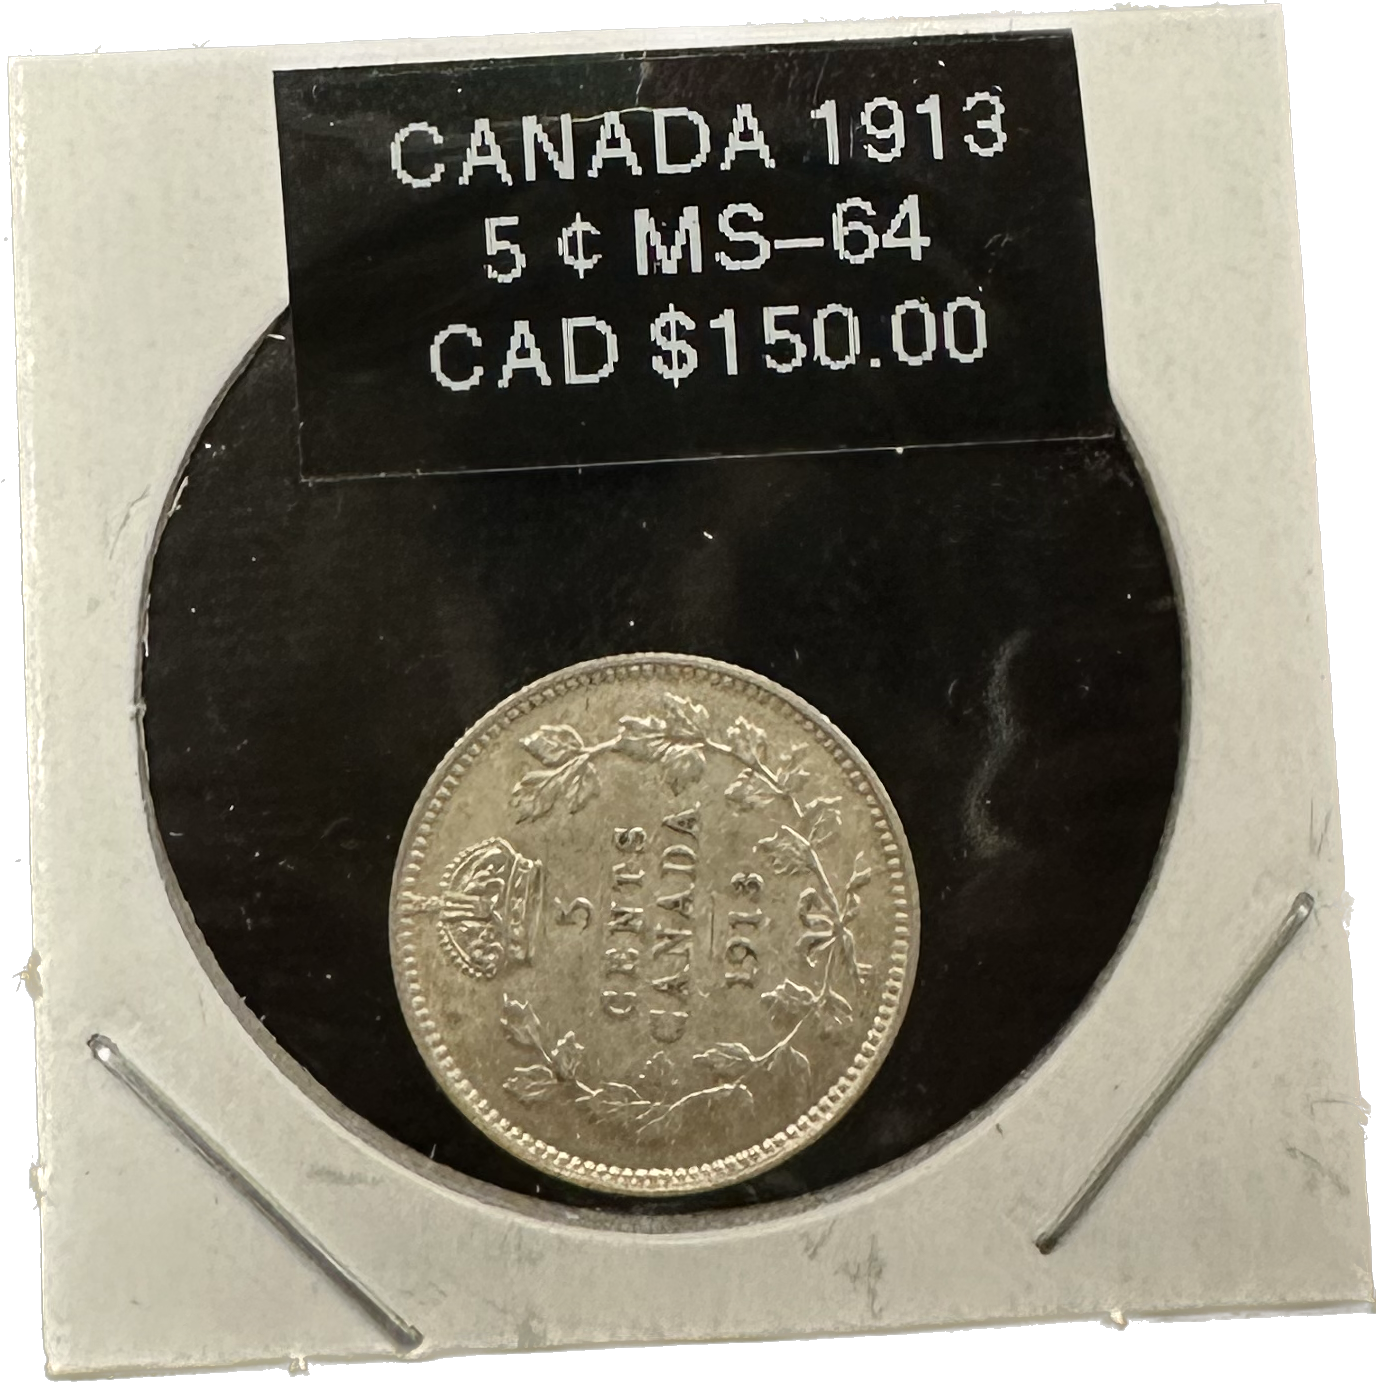 Canada 5 Cents 1913 MS-64 Coin